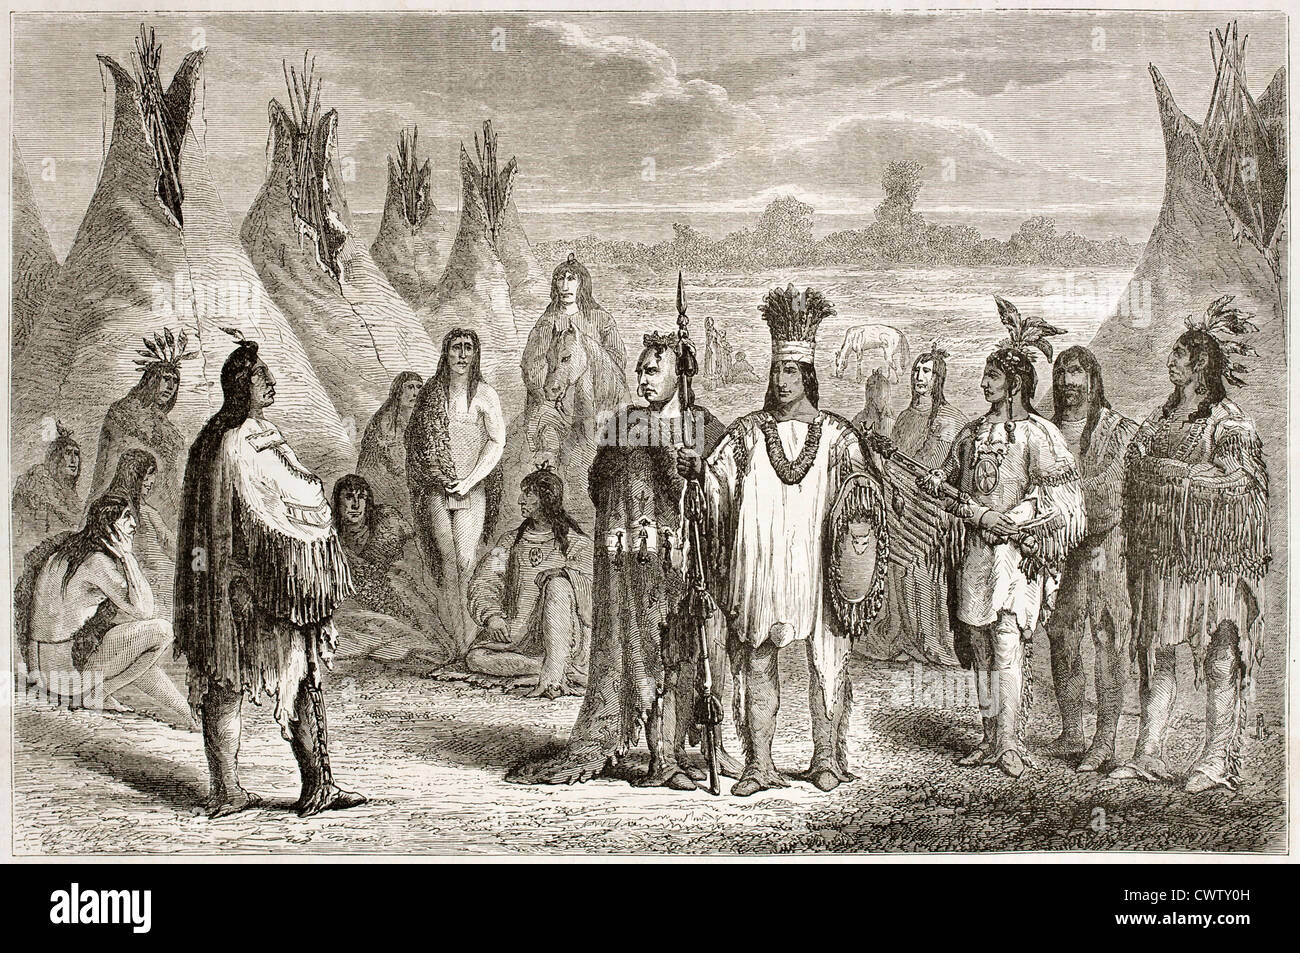 Old illustration of Cree indians Stock Photo